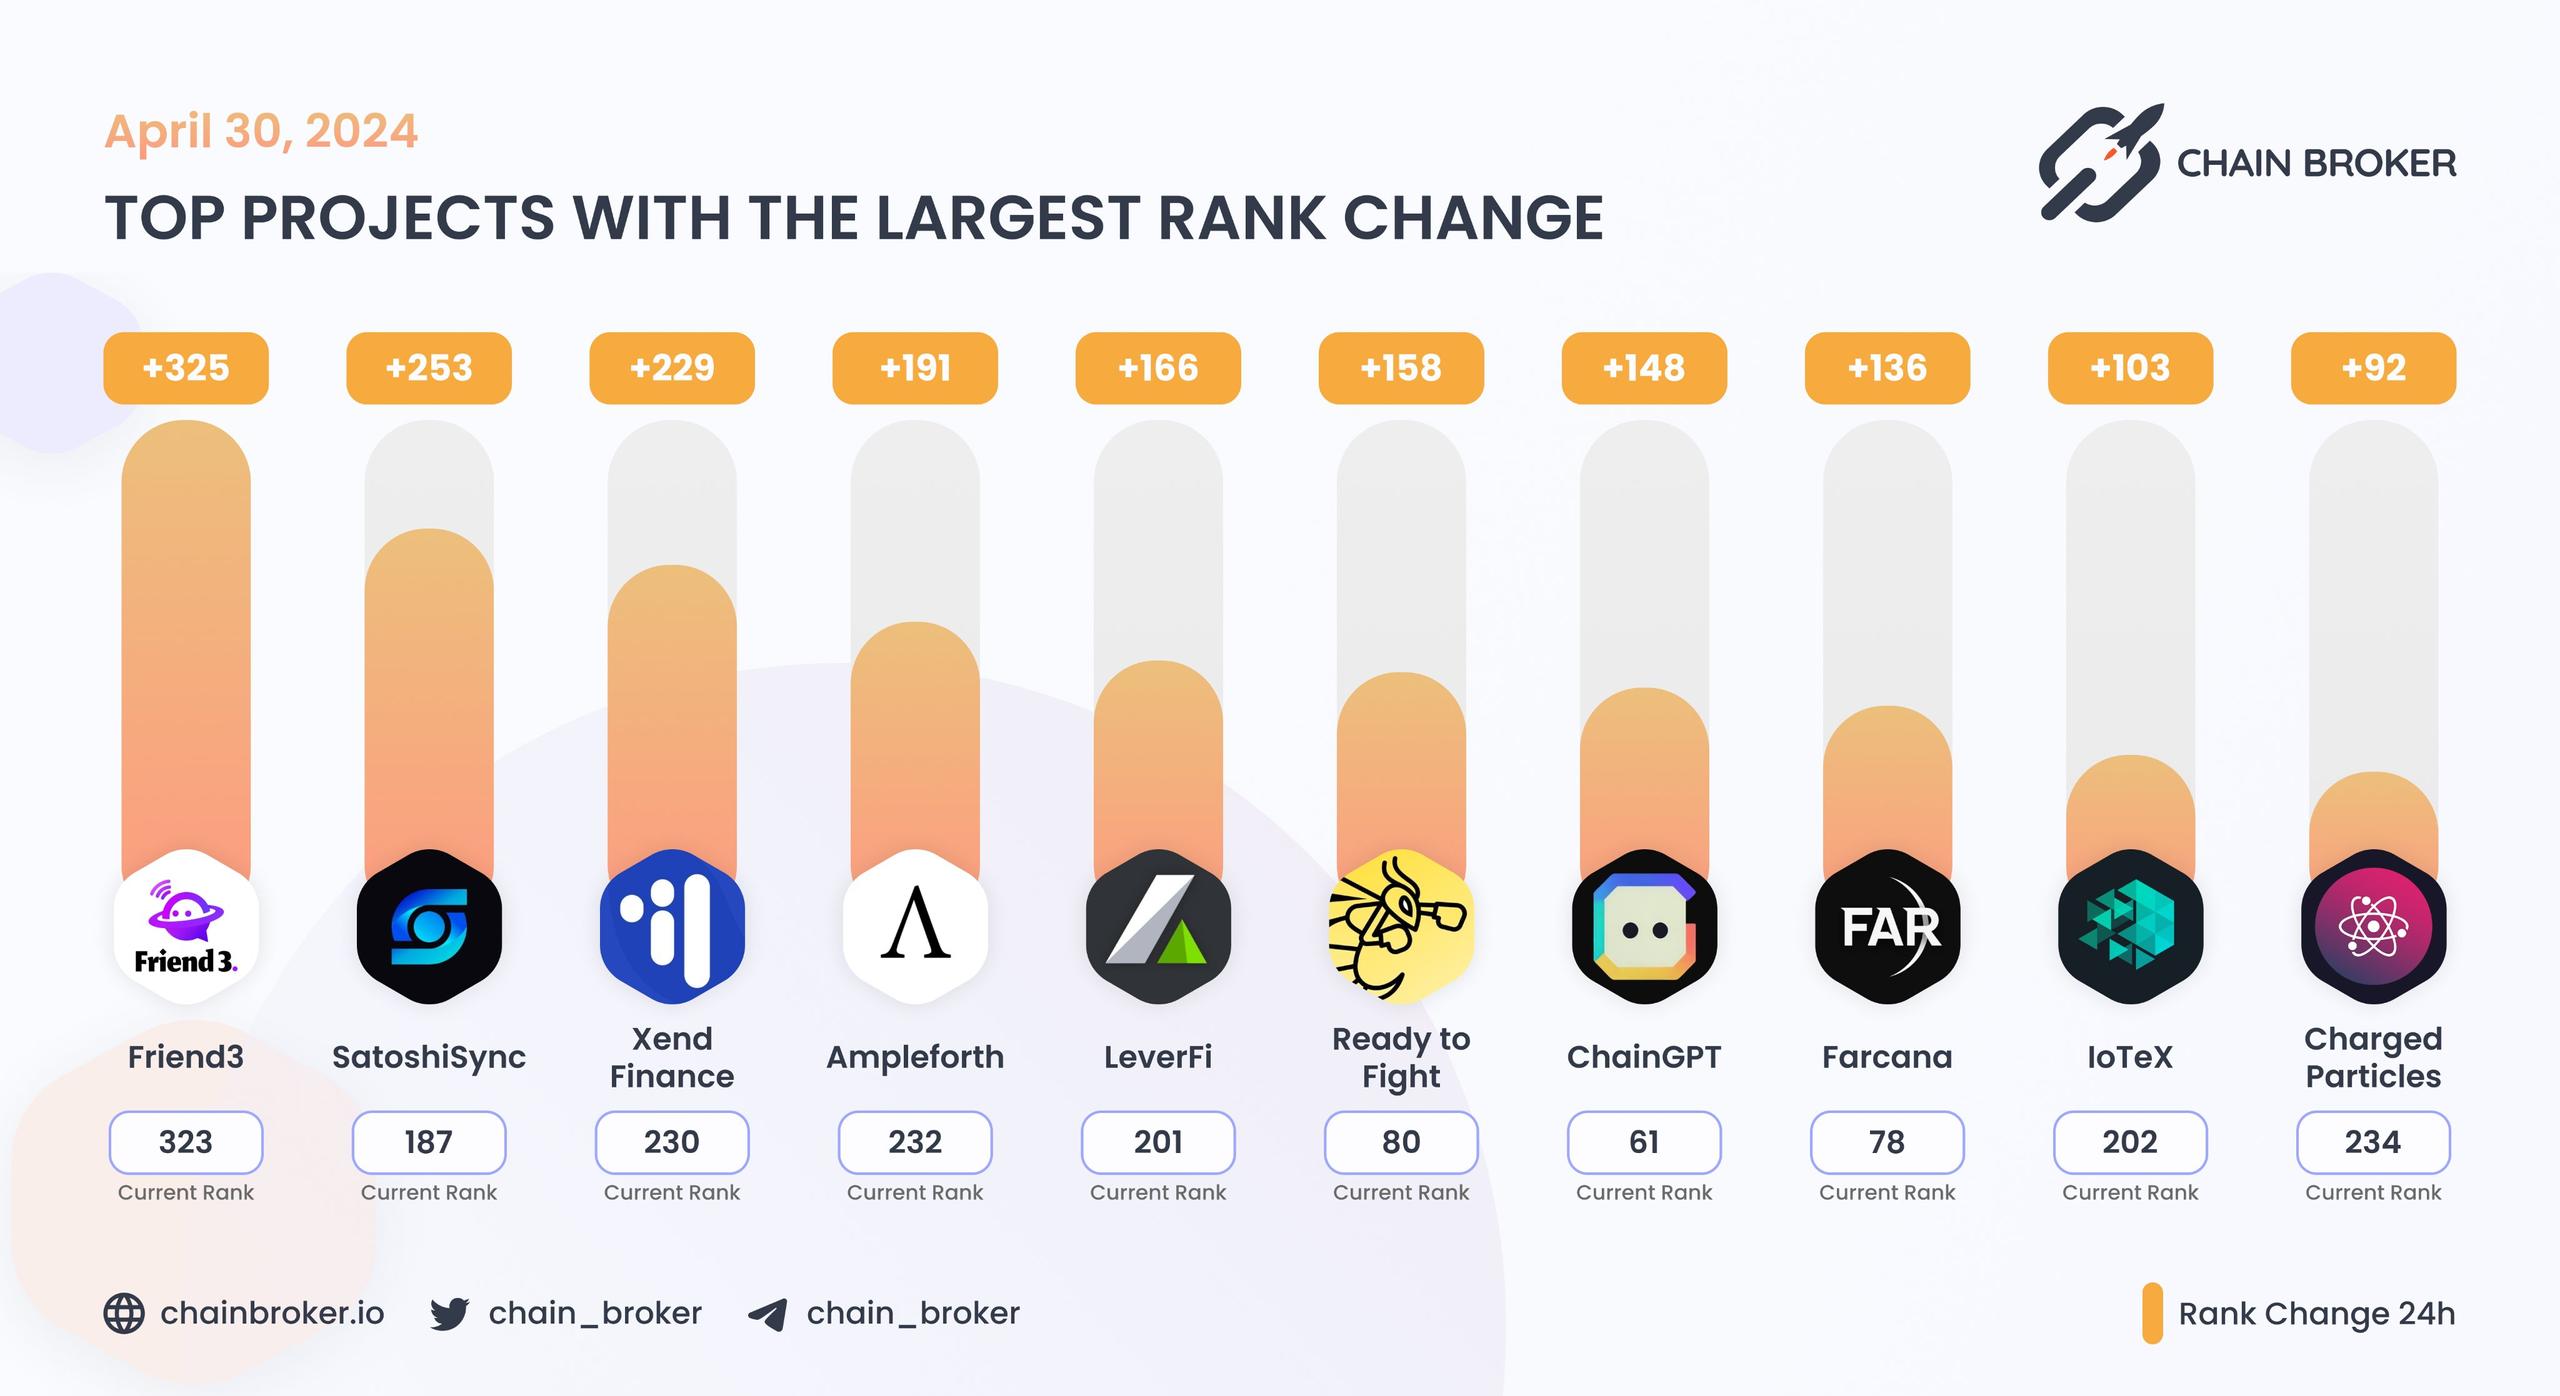 Top projects with the largest rank change